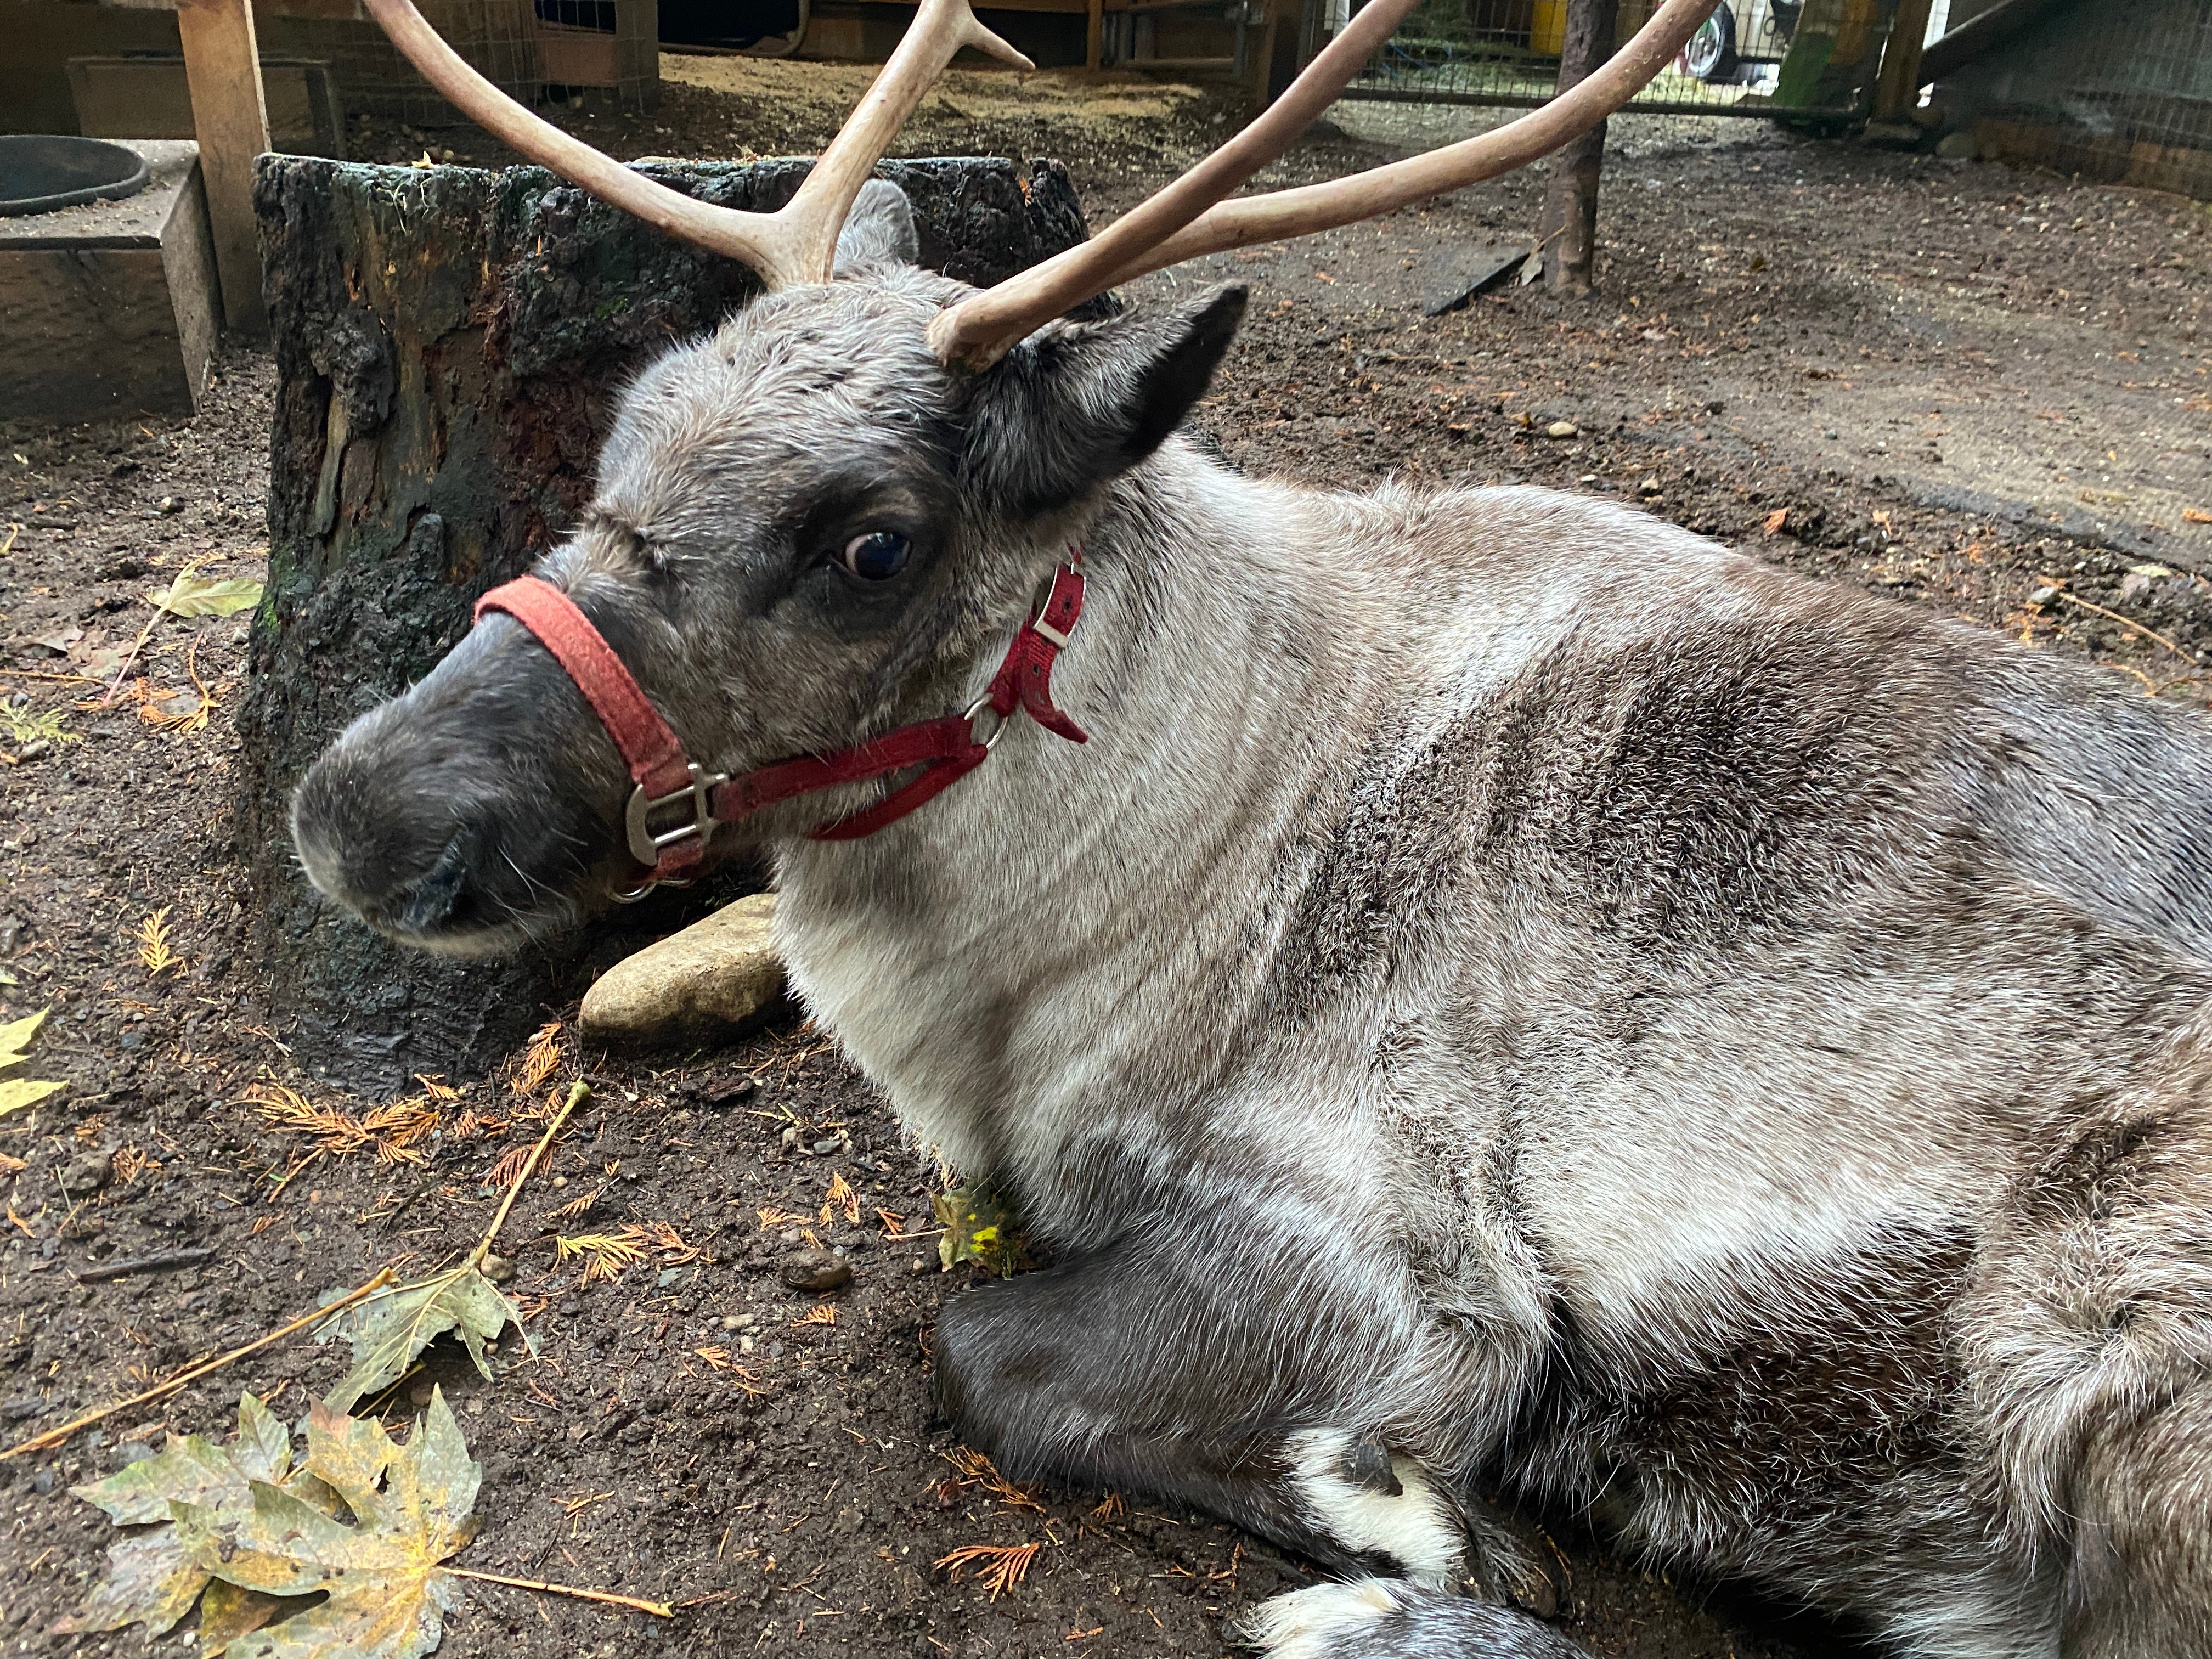 A reindeer laying down, who may have been used for Christmas events